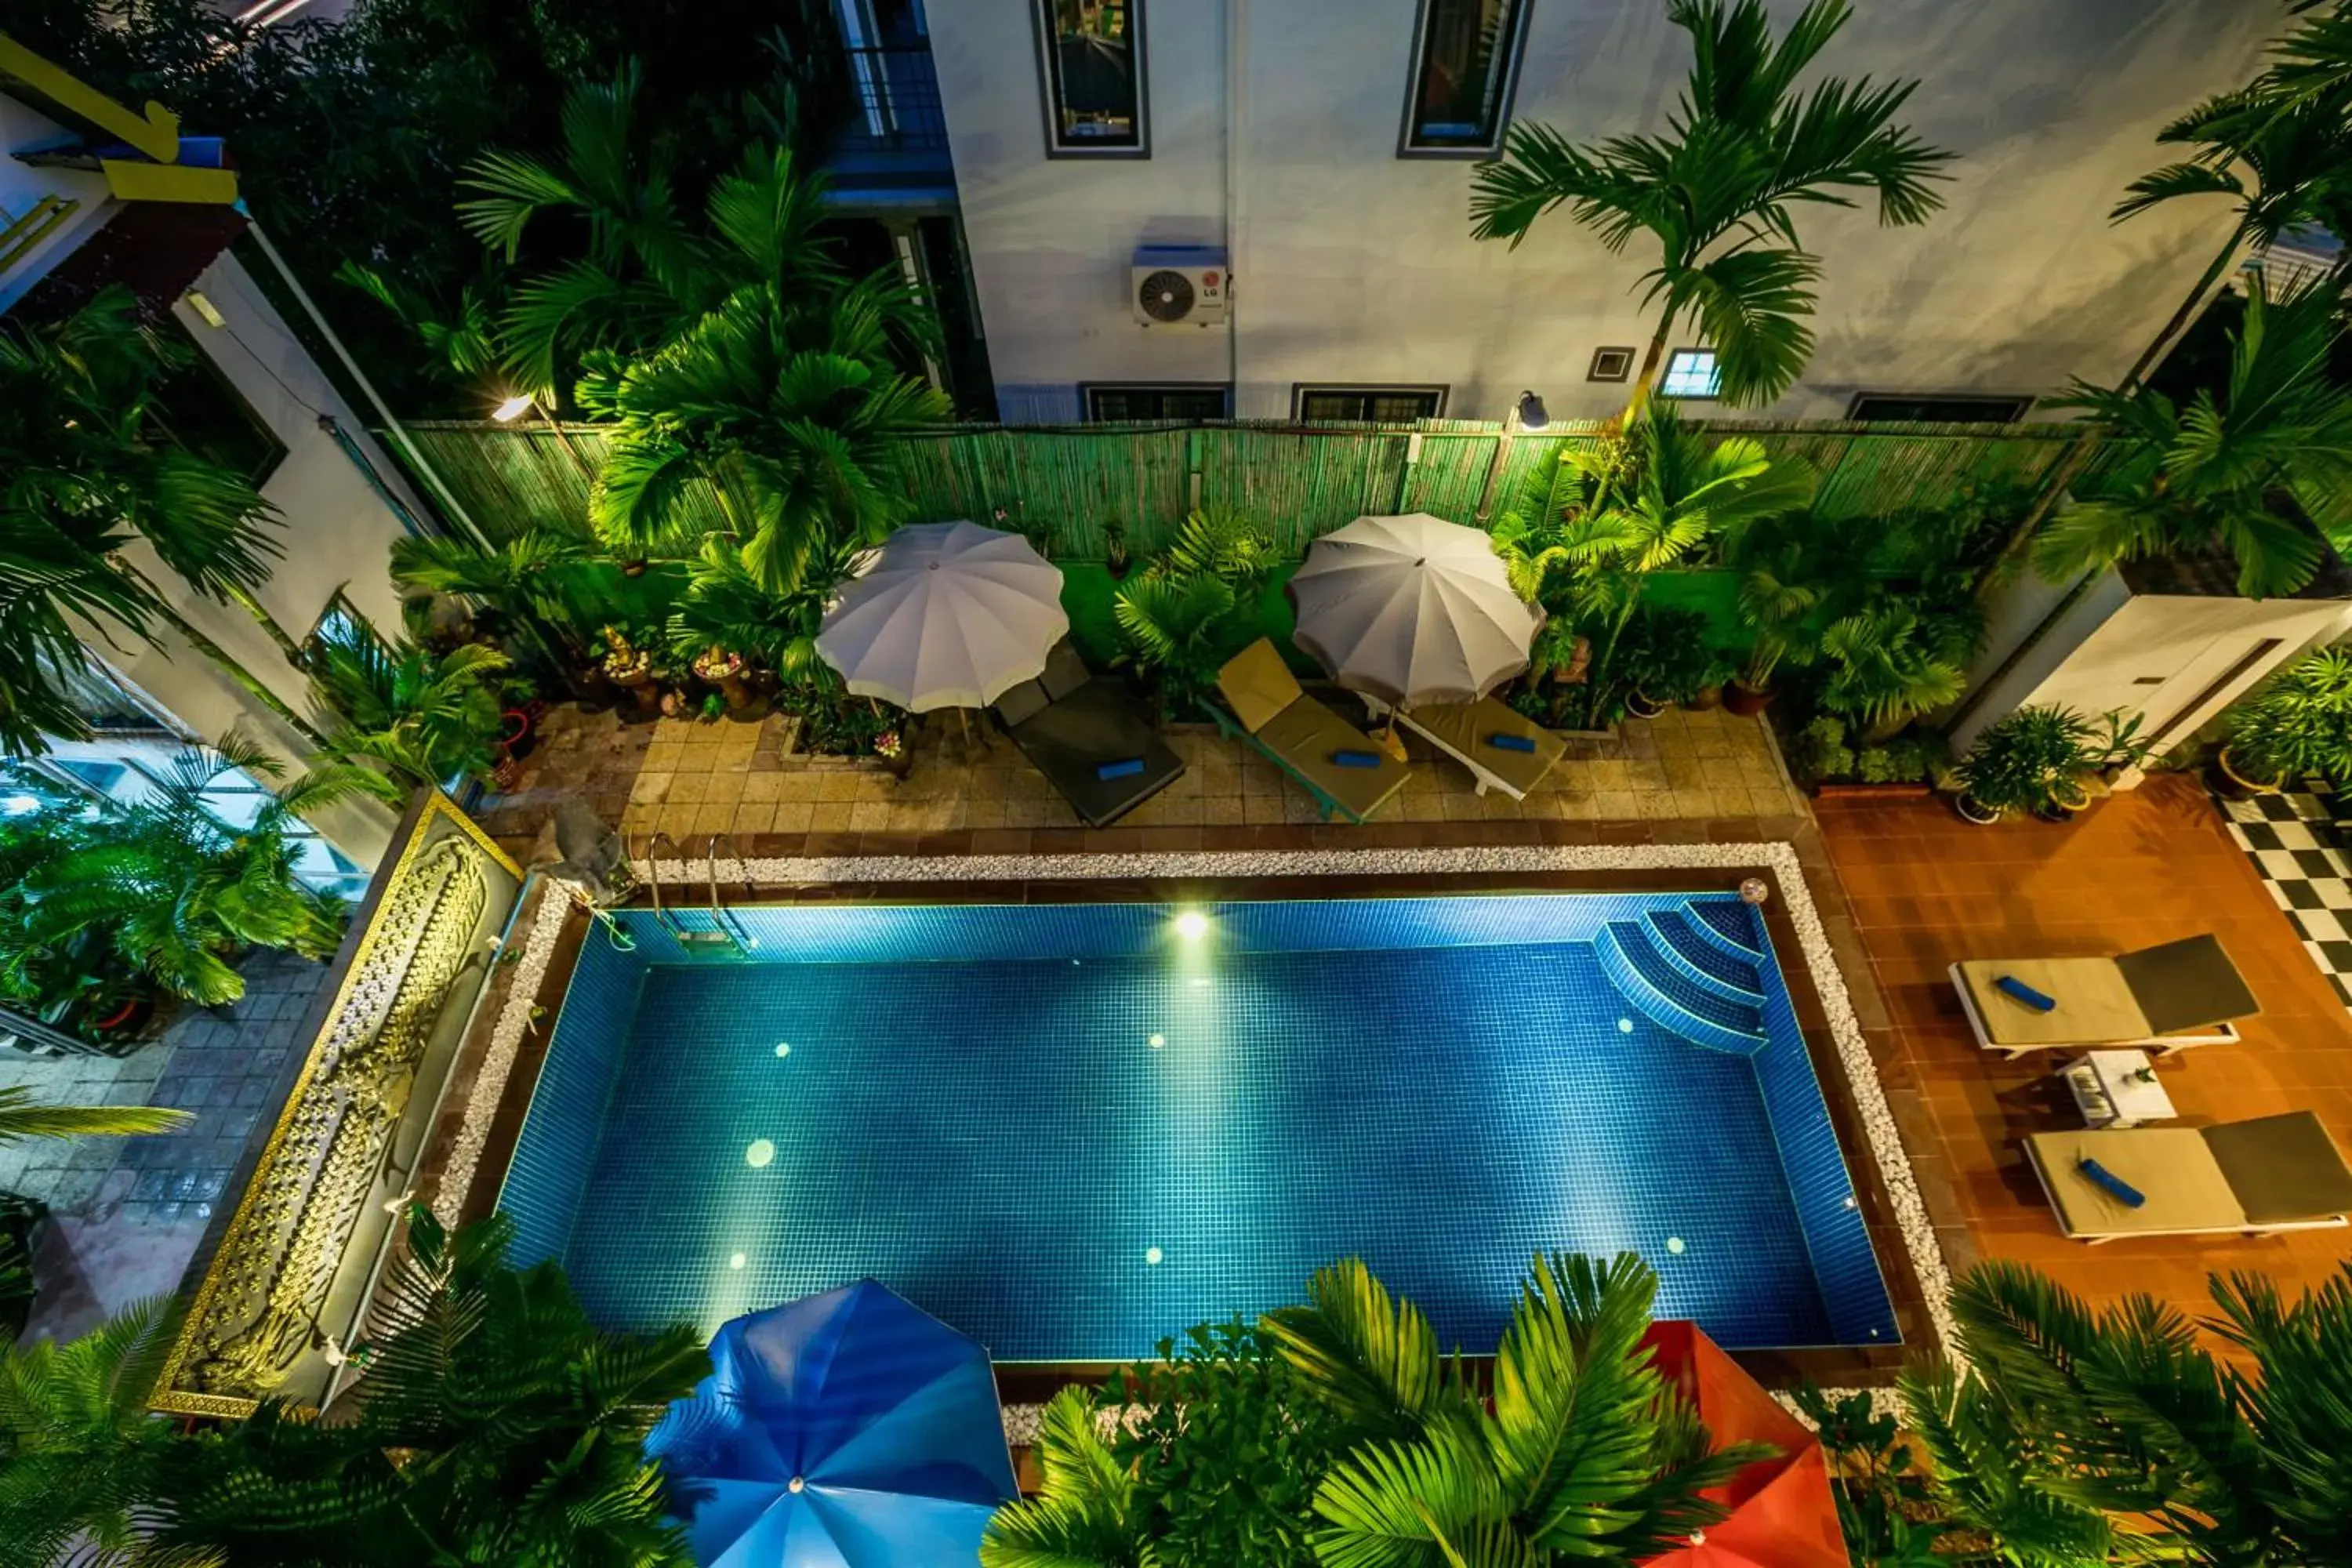 Property building, Pool View in Asanak D'Angkor Boutique Hotel